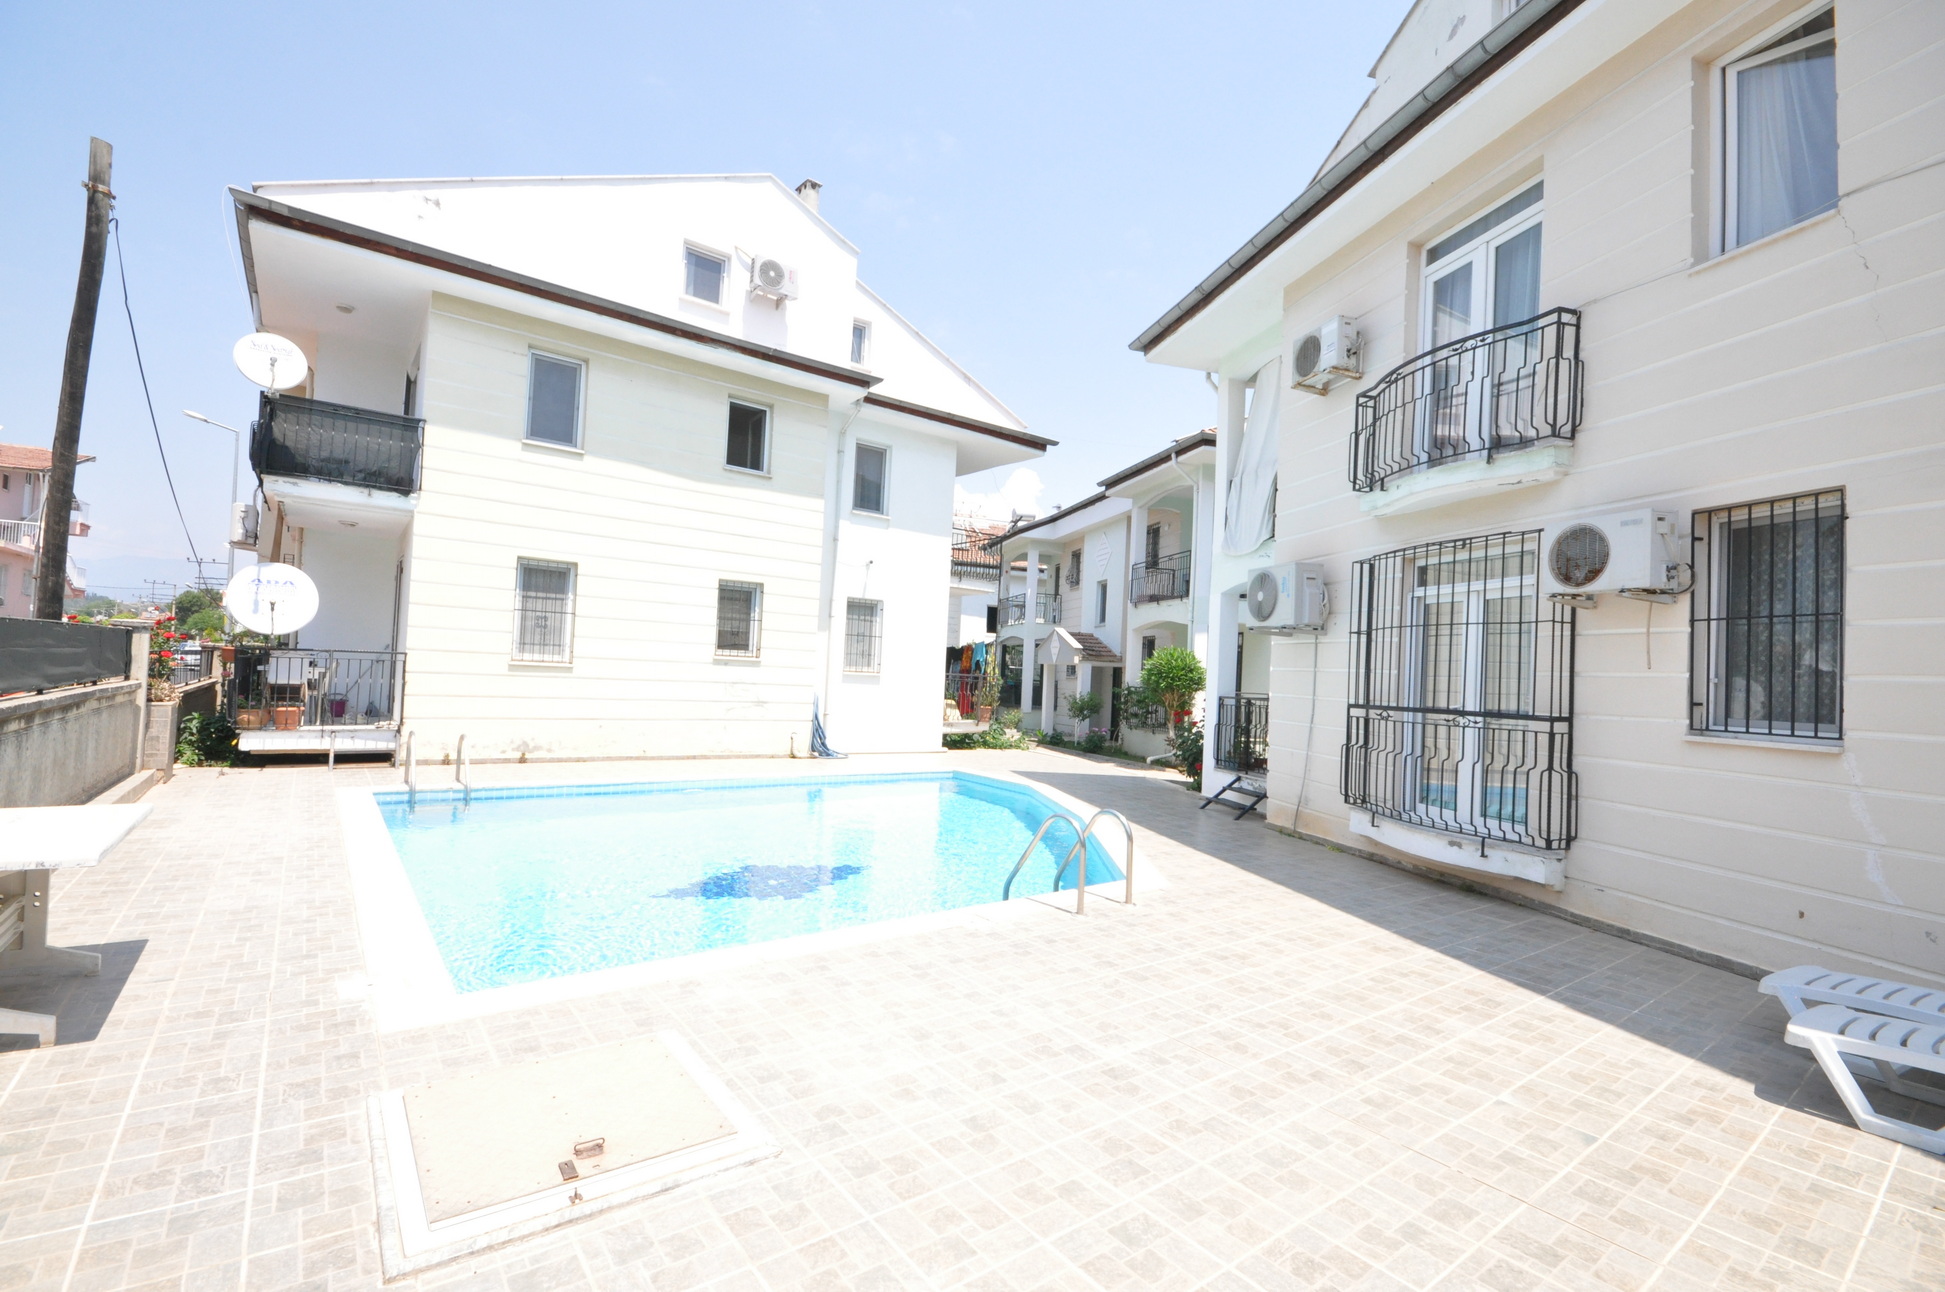 3 Bedroom Duplex Apartment with Communal Swimming Pool For Sale